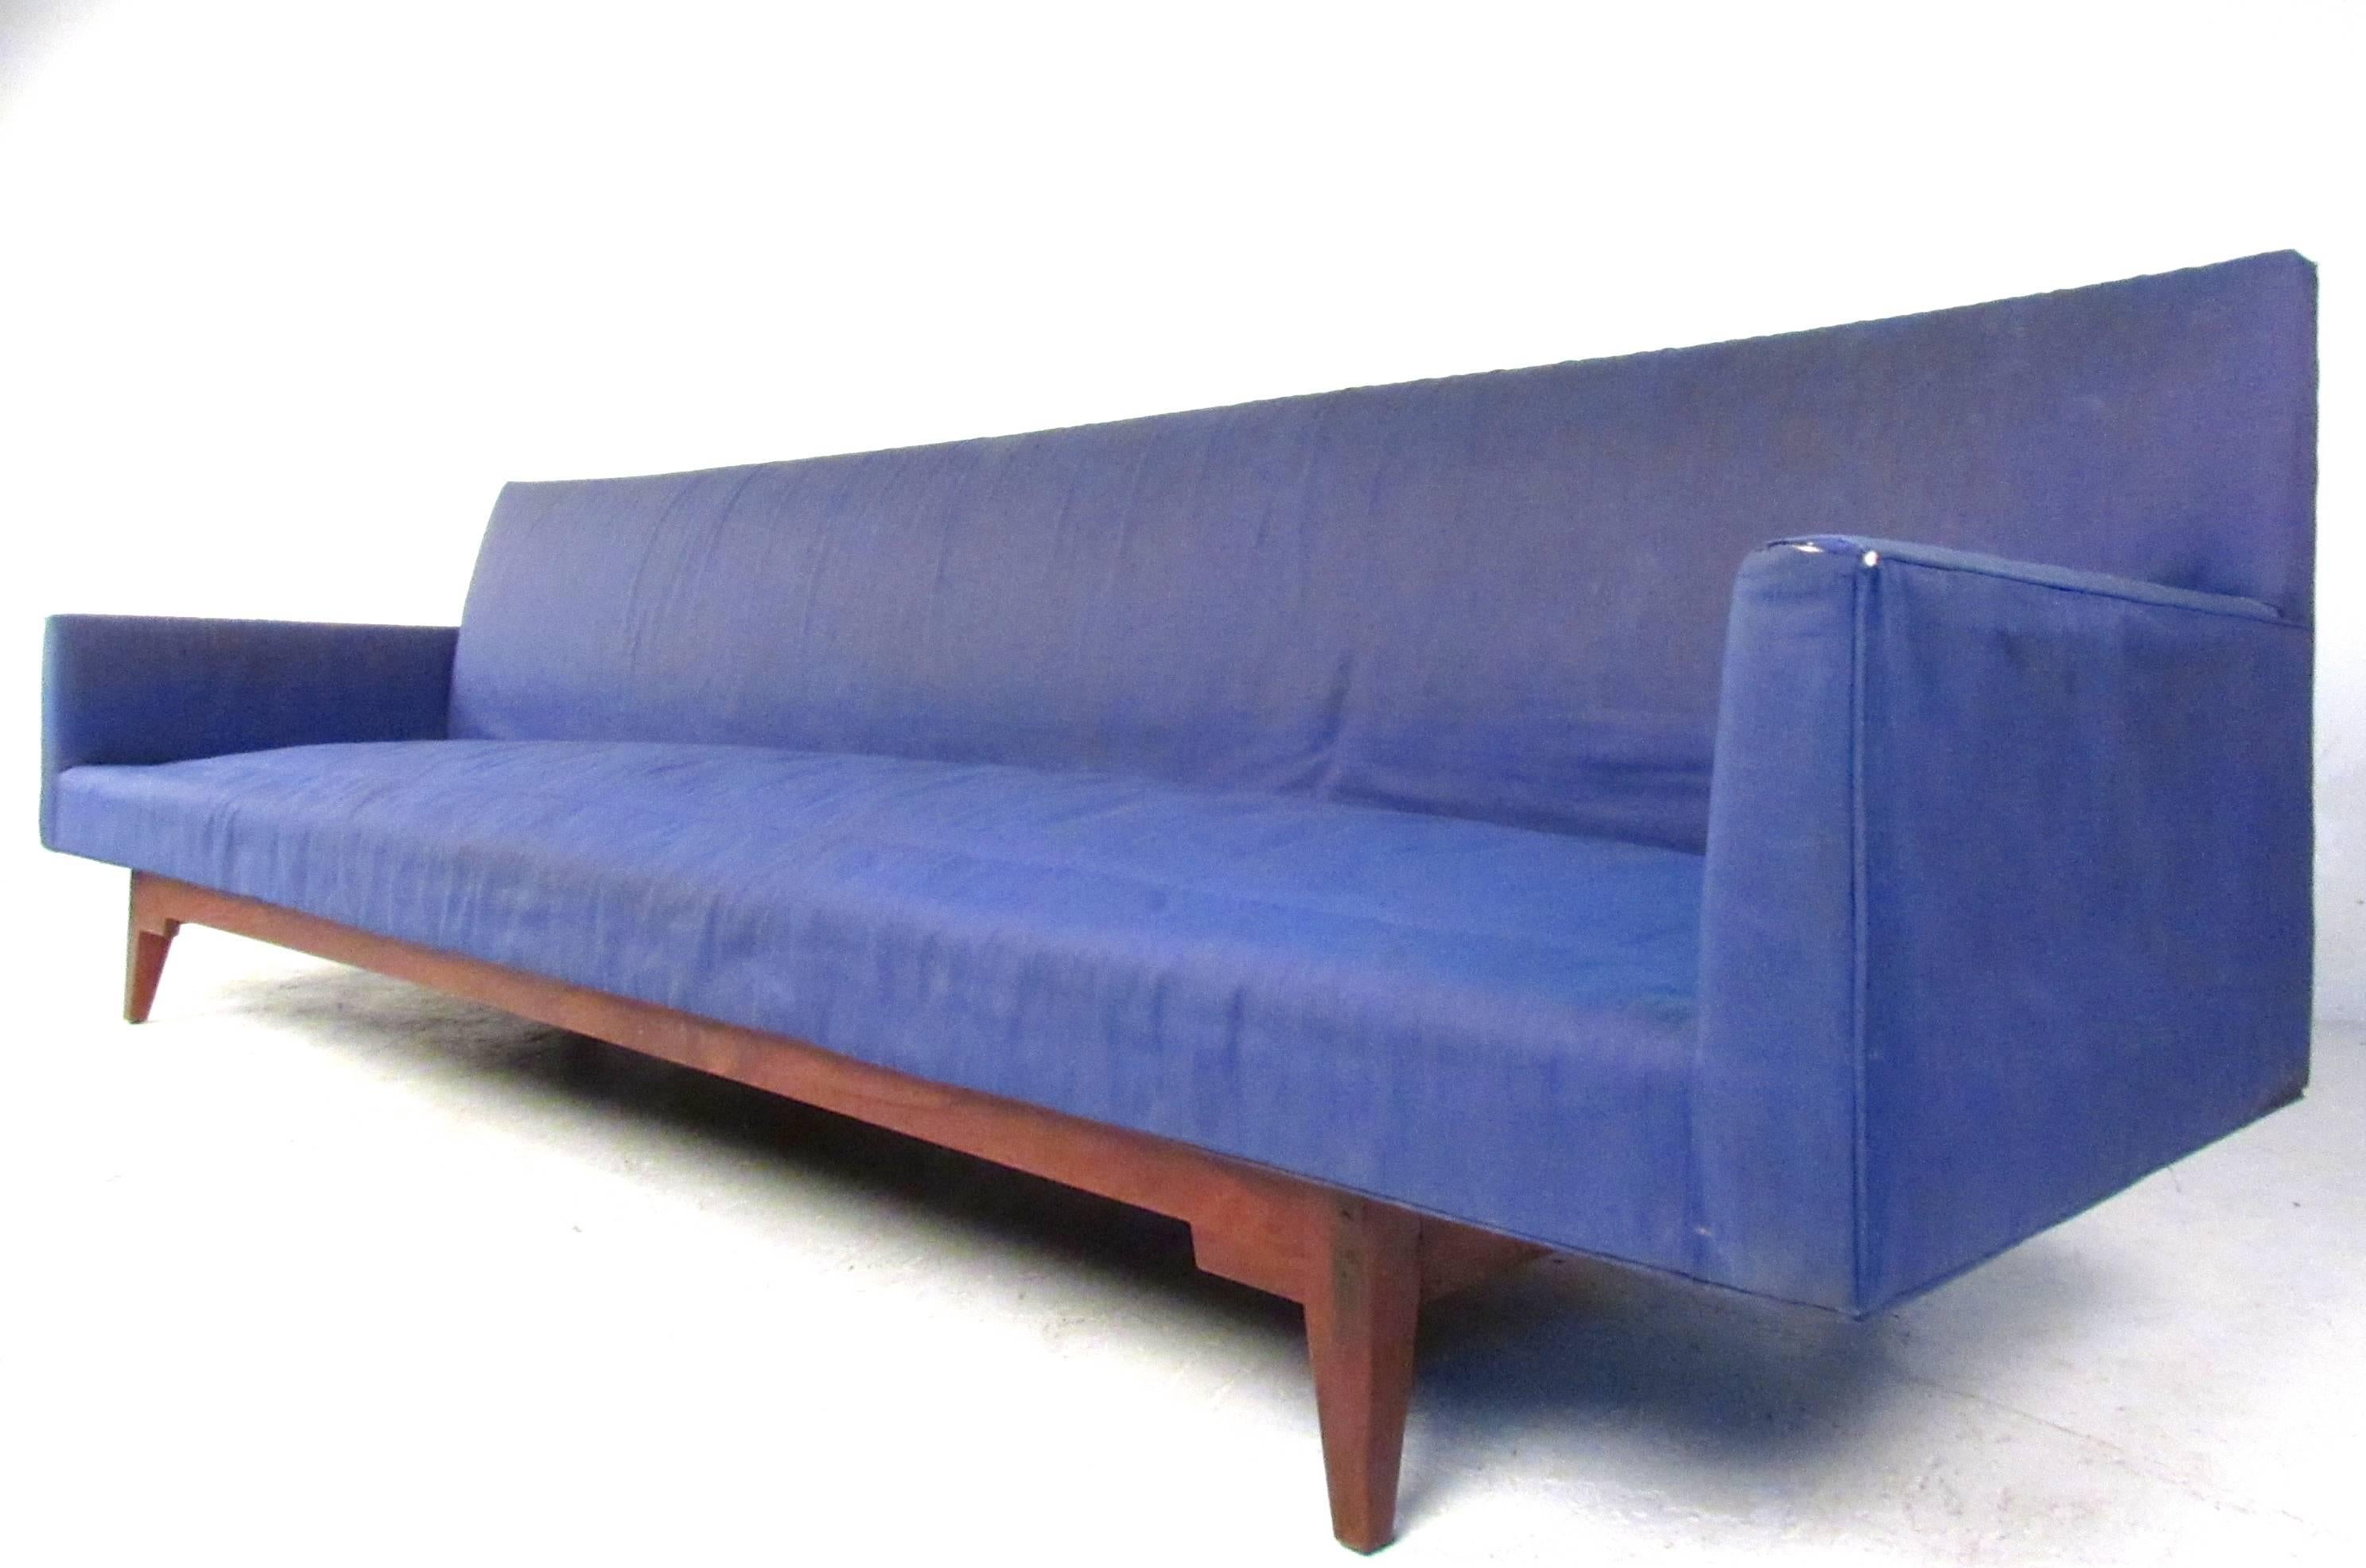 This large-scale sofa measures over 9 feet long and makes a unique and stylish seating addition to any interior. Comfortable and stunning in it's size and simplicity, the design by Jens Risom's 